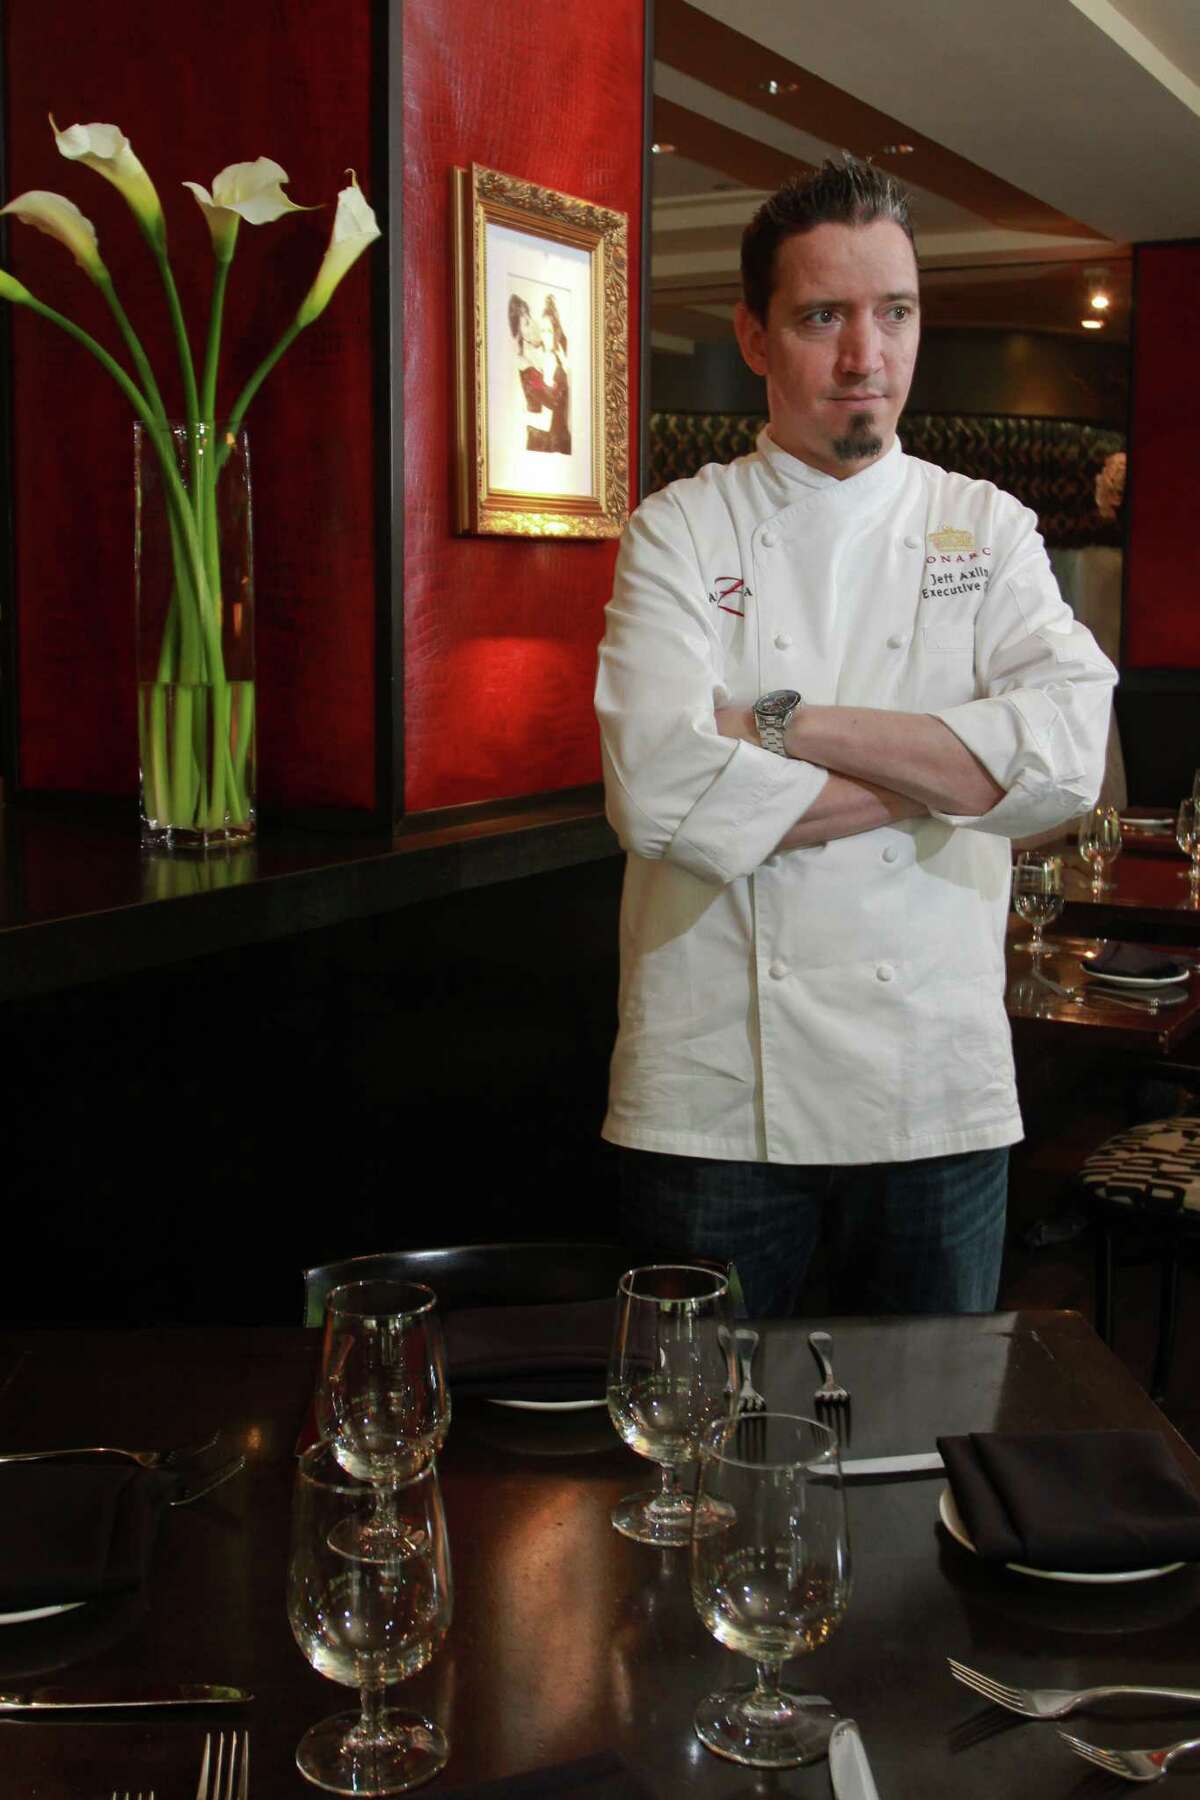 (For the Chronicle/Gary Fountain, May 13, 2014) Jeff Axline, executive chef at Hotel Zaza, in the Monarch Bistro dining room.